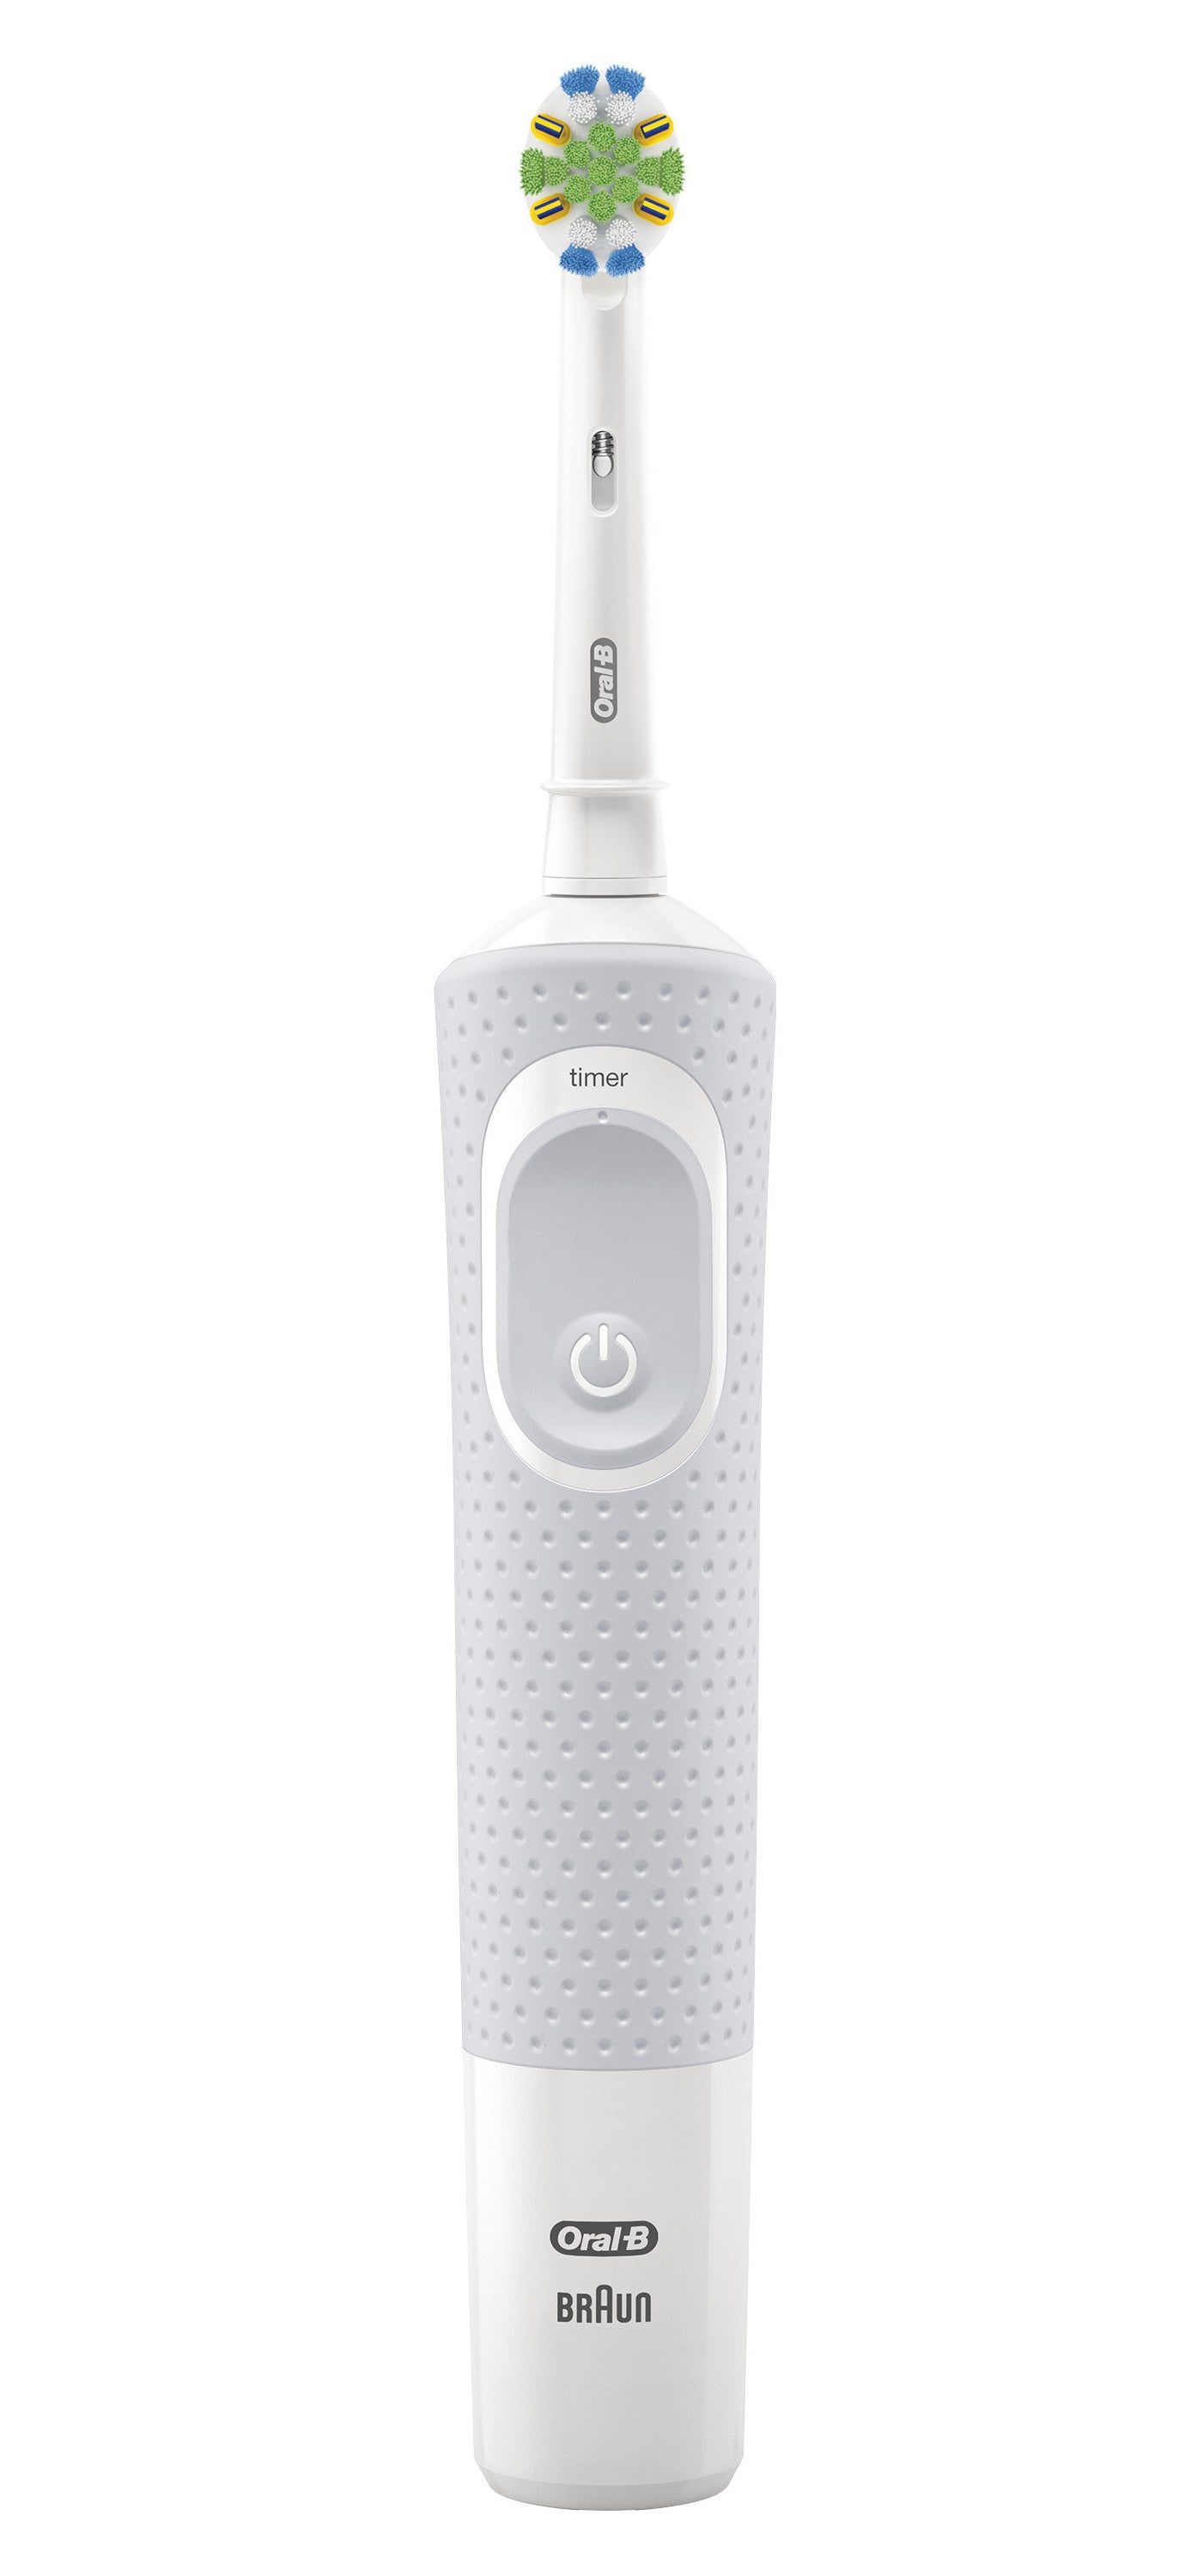 White electric toothbrush with blue and green bristles